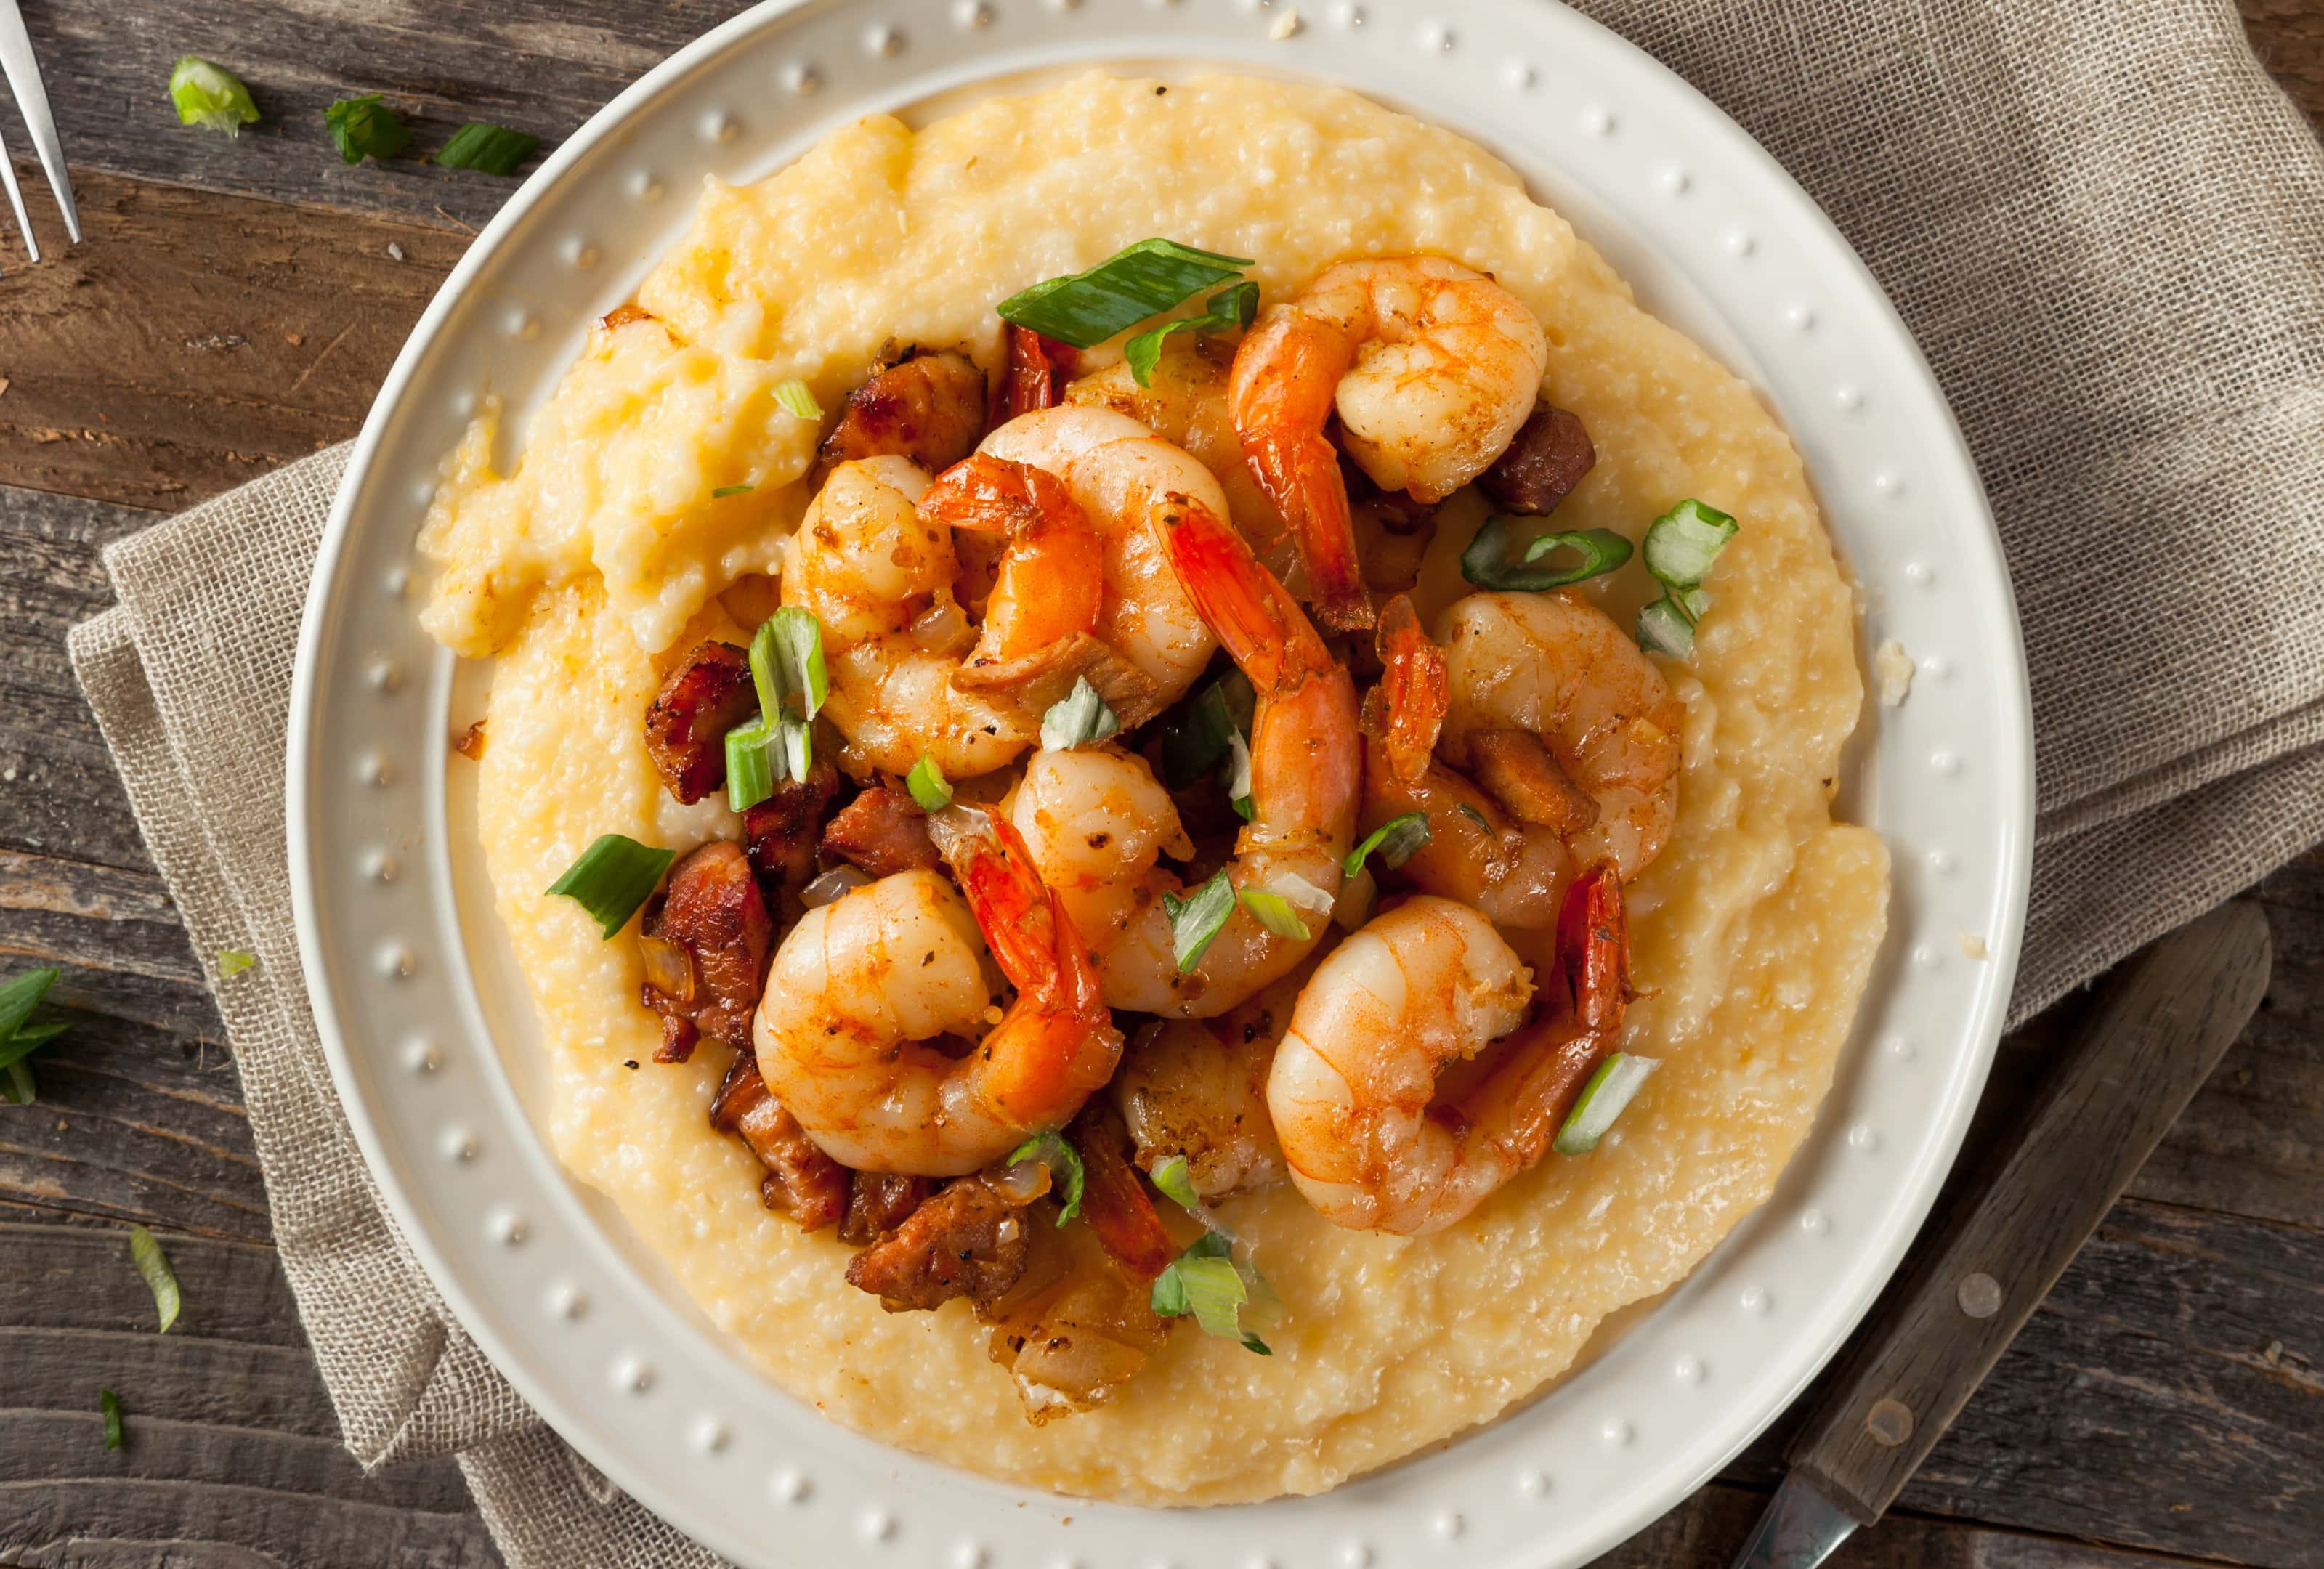 Tasty Pappadeaux shrimp and grits recipe